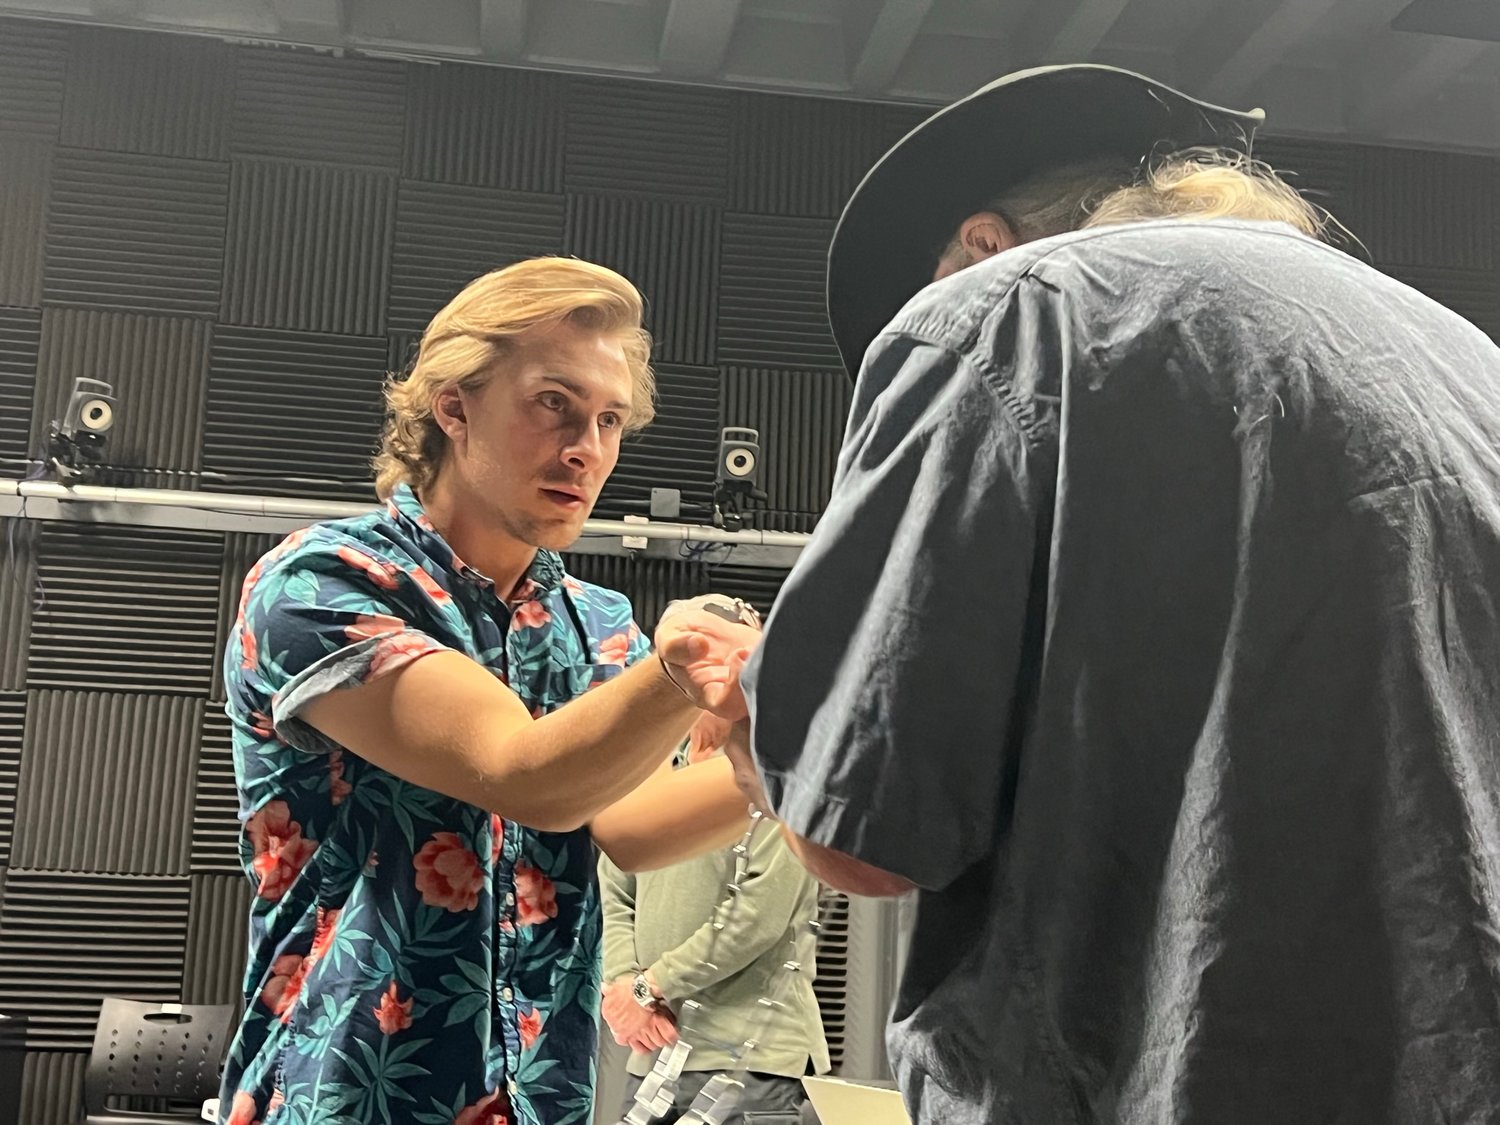 Billy the Kid (played by Nick Check) shakes his handcuffs at David G. Thomas who was filling in as a deputy during rehearsal of “The Trial of Billy the Kid,” as directed by NMSU Creative Media program director Ross Marks. Thomas is the author of the play.